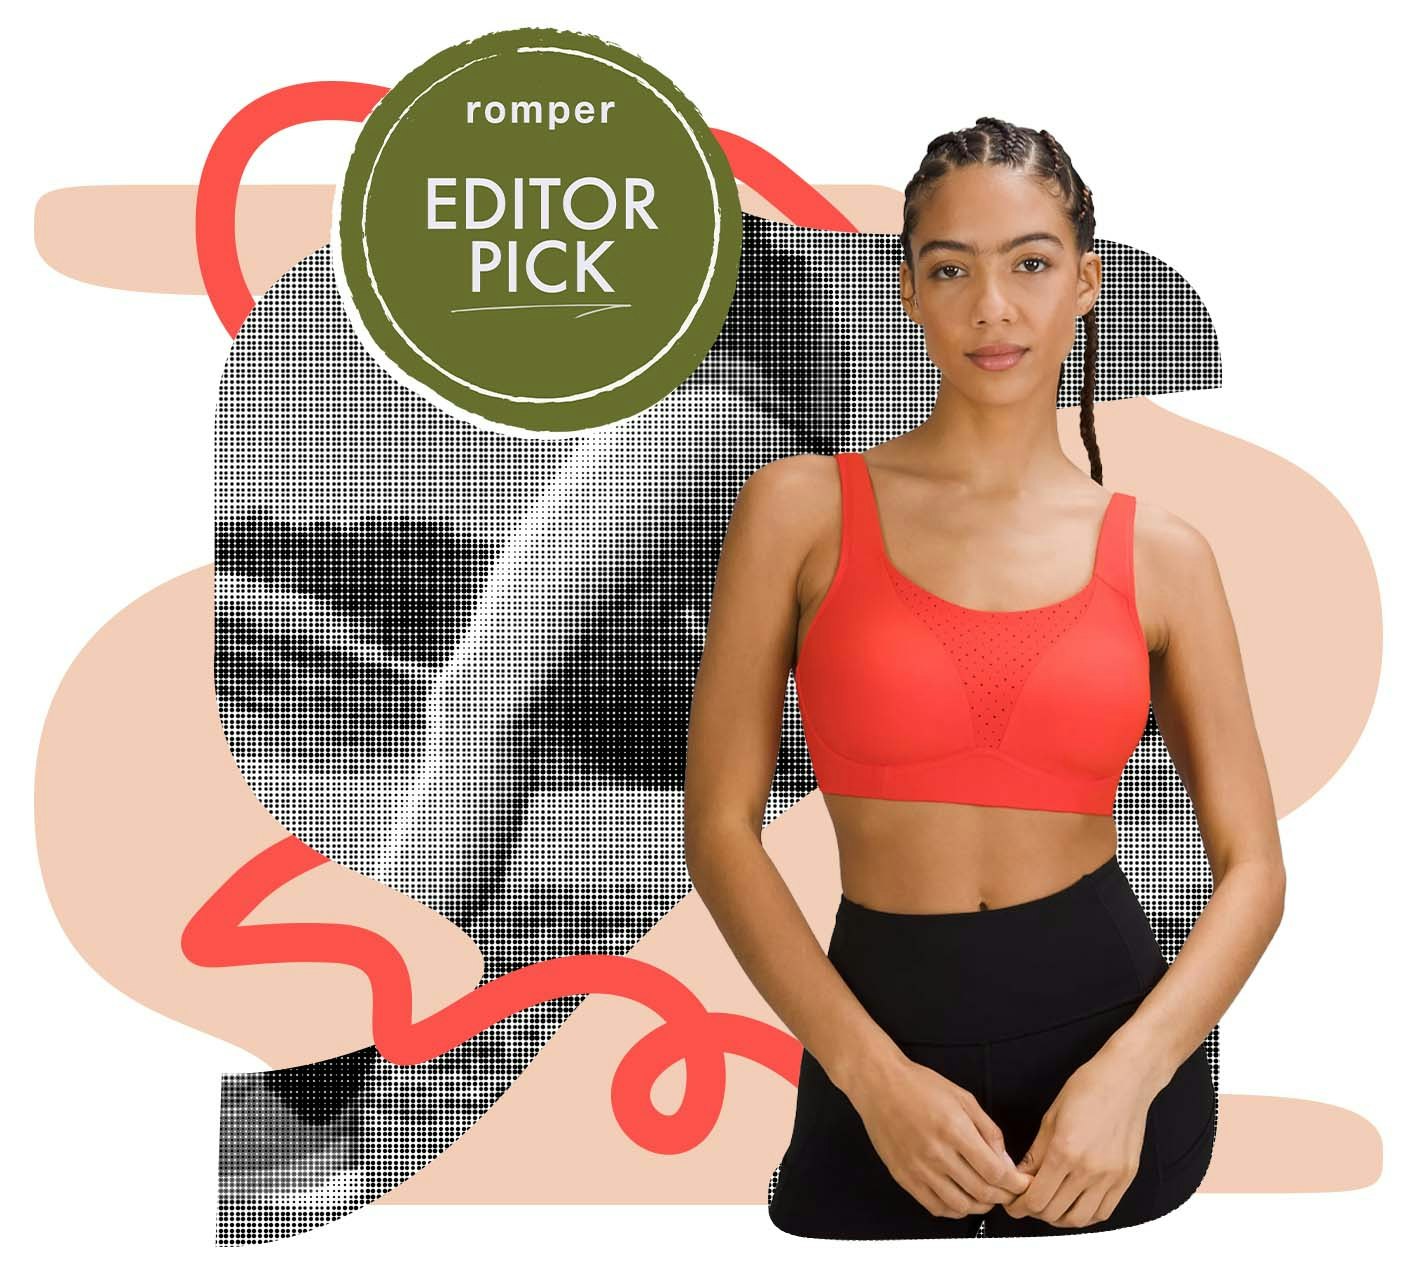 lululemon Free to Be Sports Bra Variations - Schimiggy Reviews